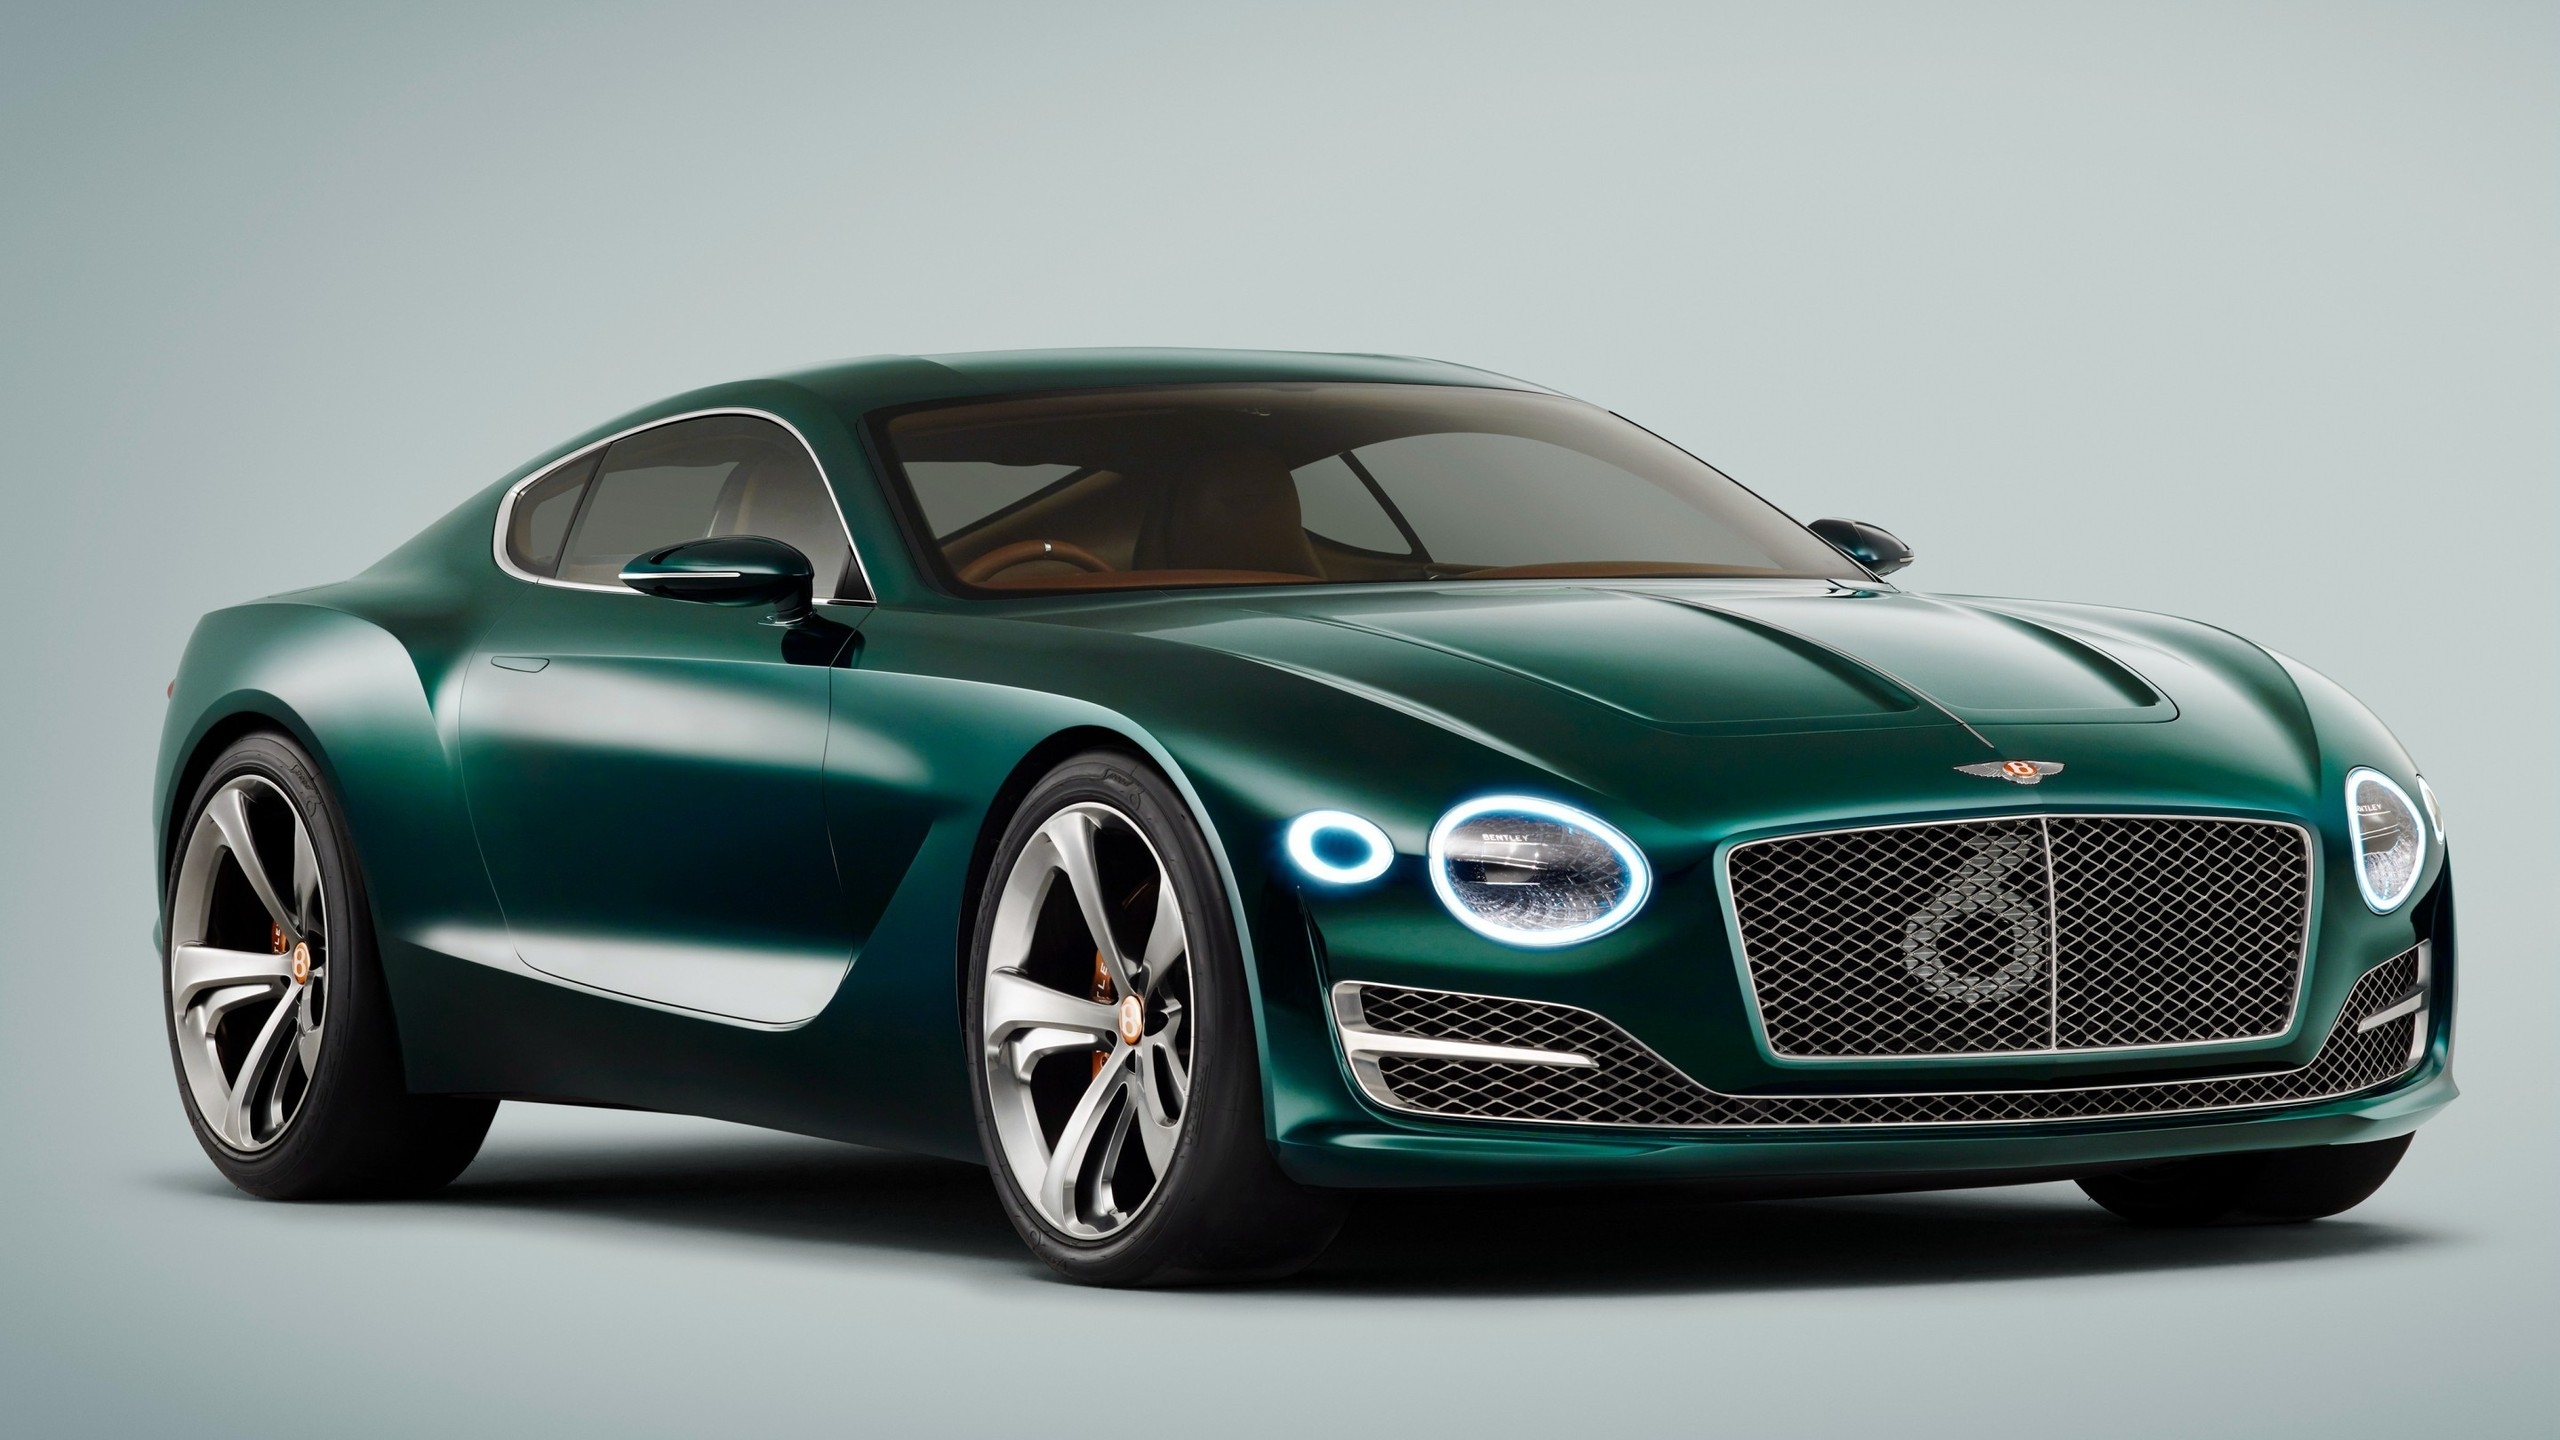 Bentley EXP 10 Speed 6 for 2560x1440 HDTV resolution